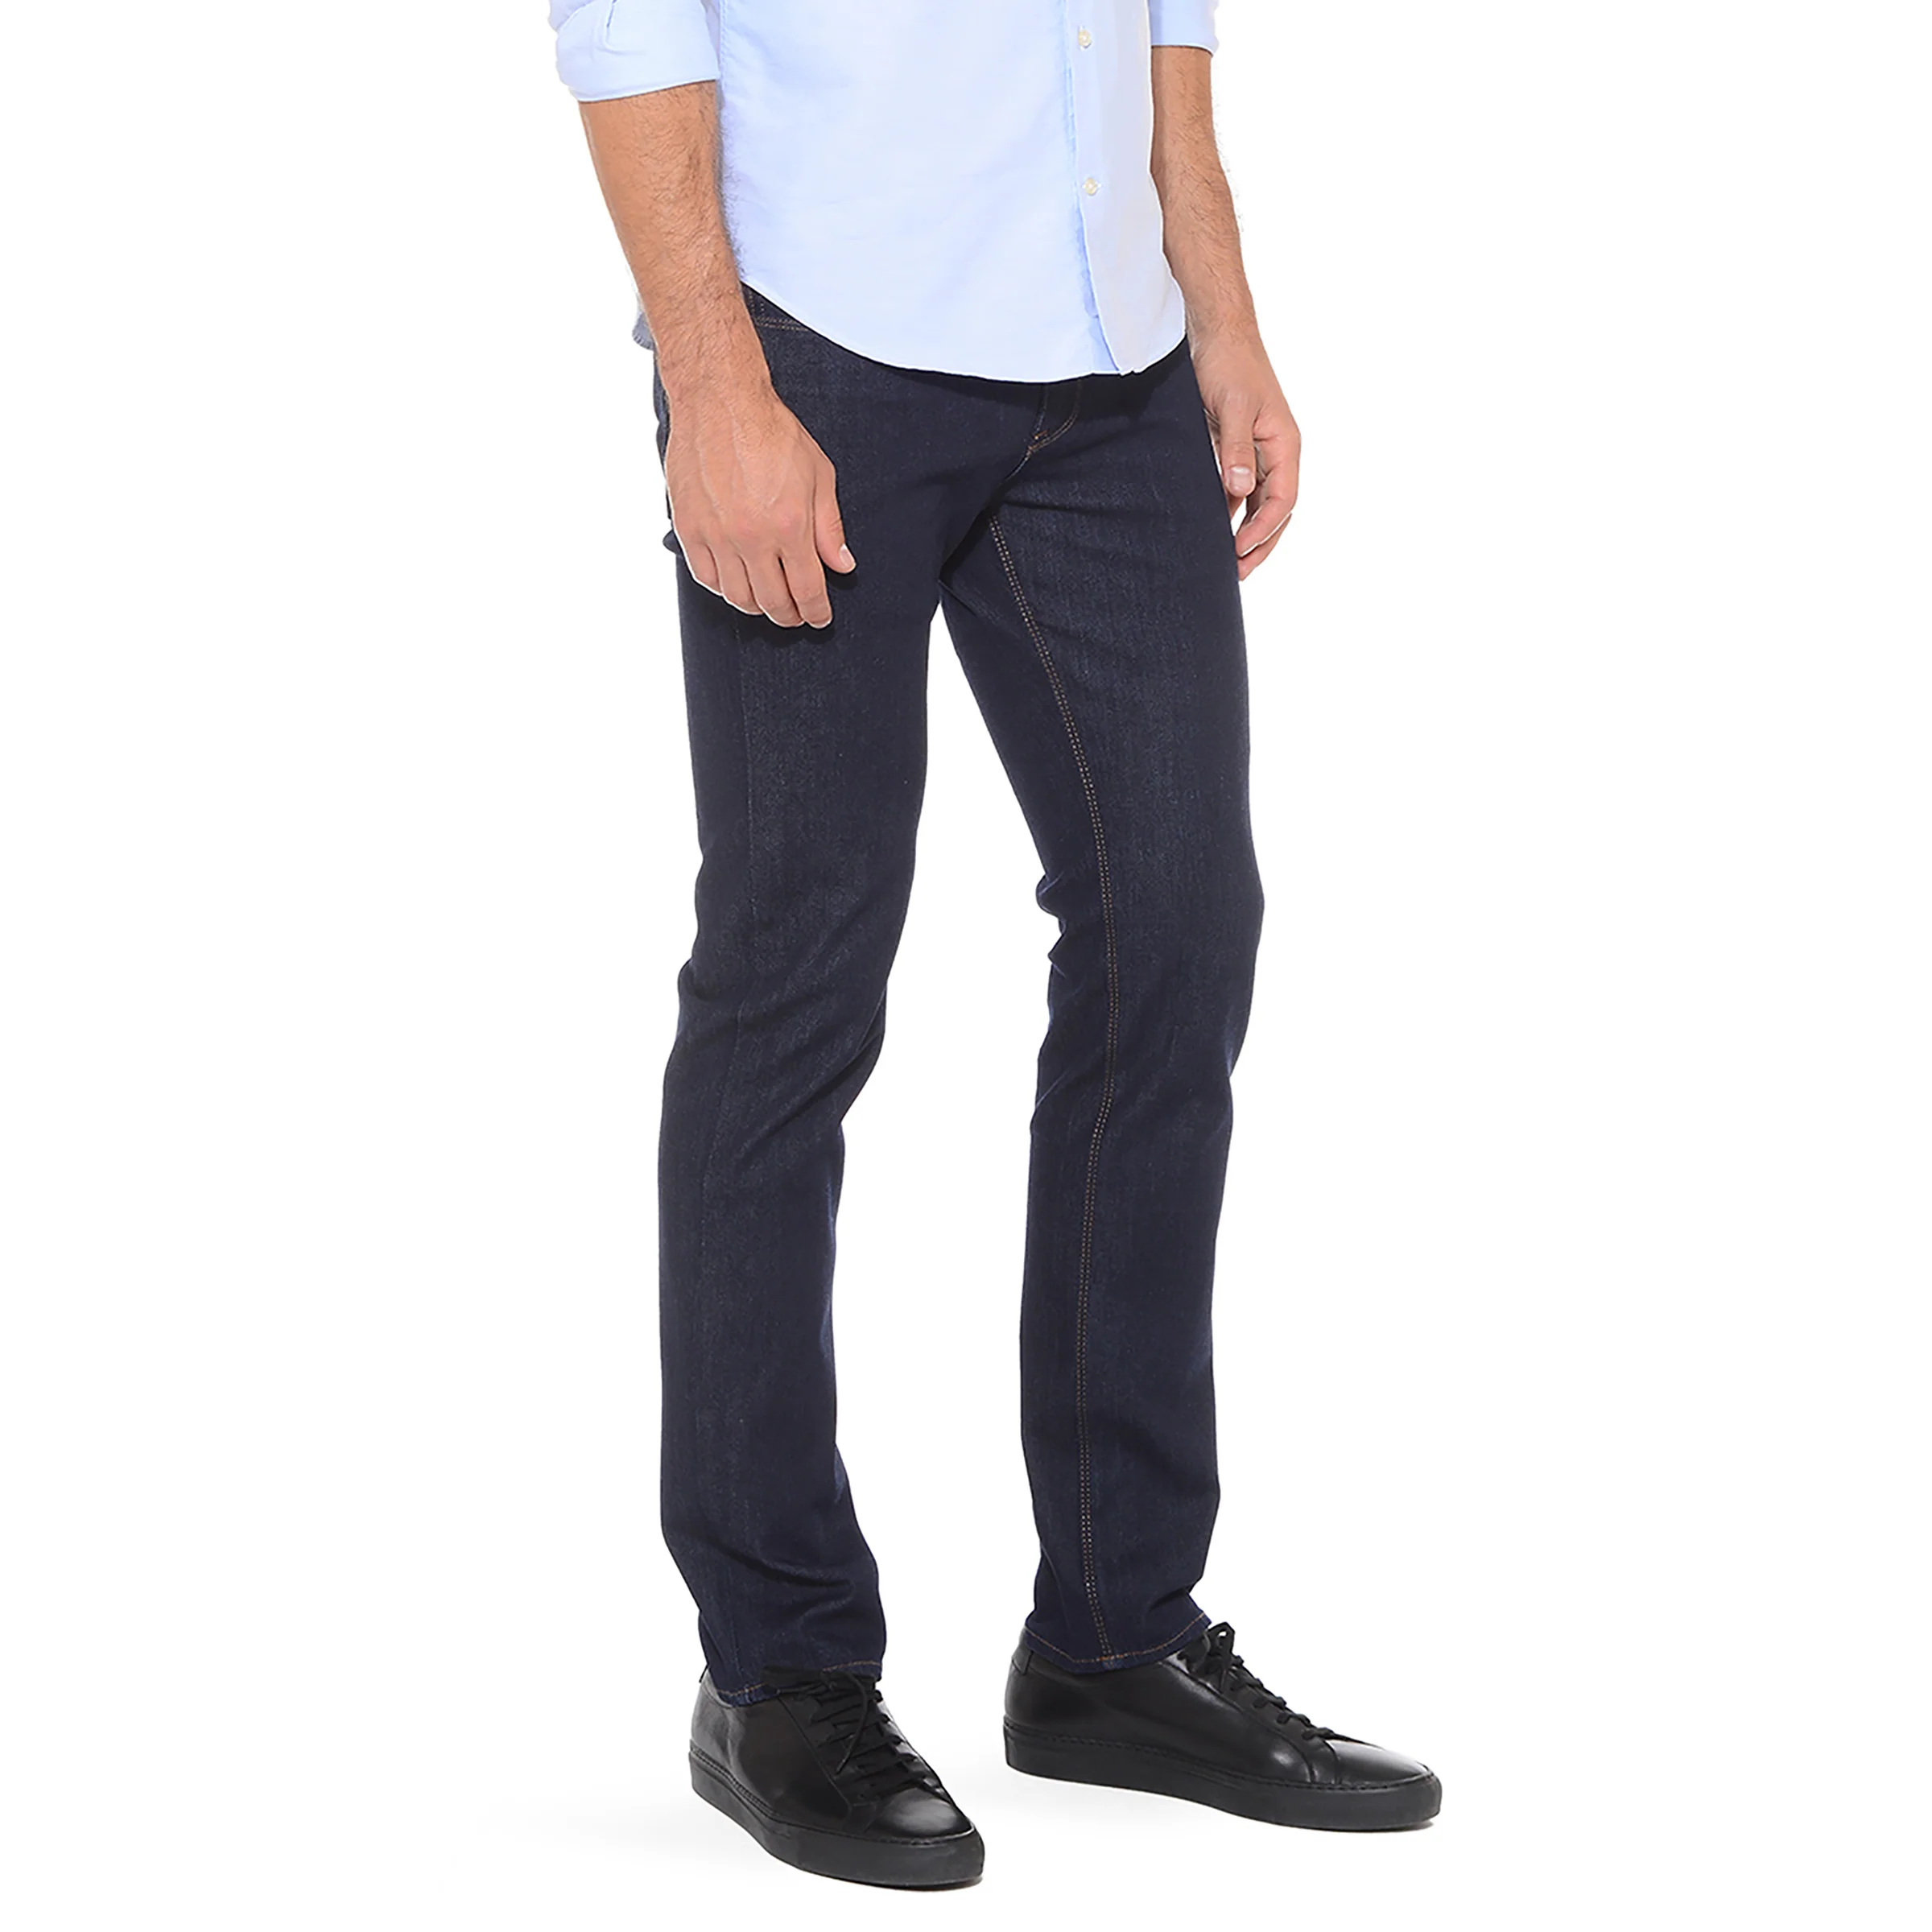 Slim Broome Stretch Jeans by Mott & Bow